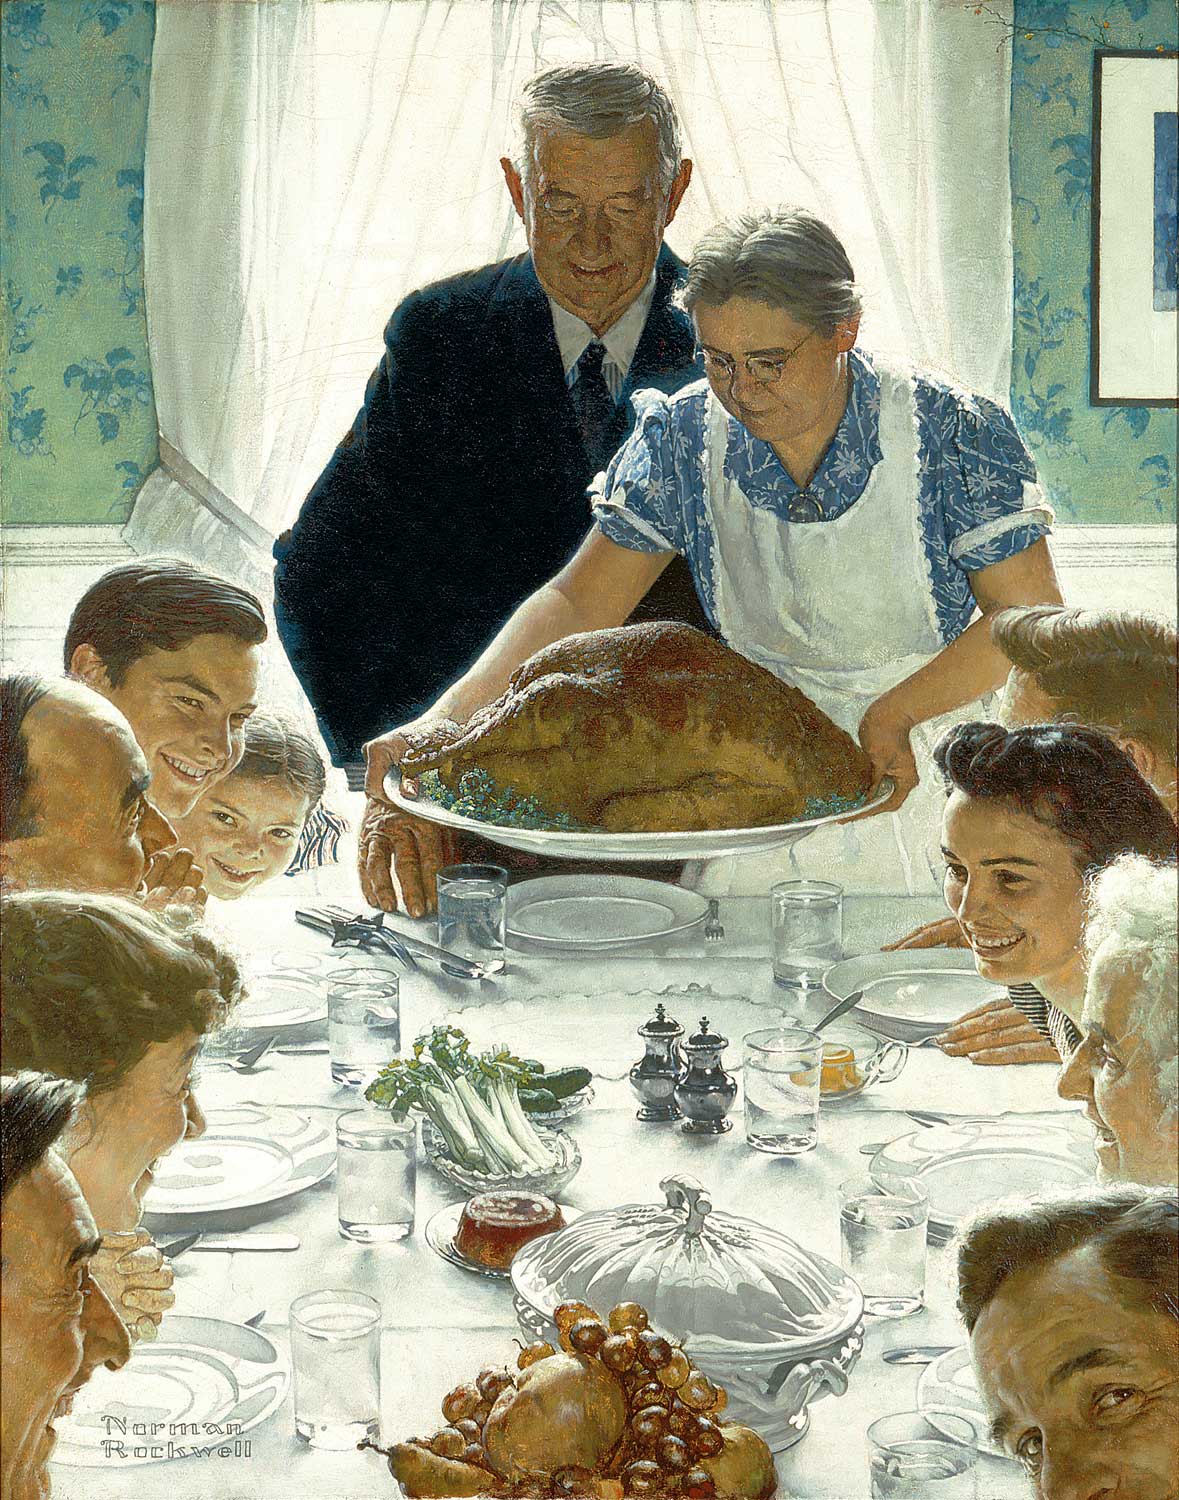 Iconic painting from 1943 by Norman Rockwell, titled “Freedom from Want”, depicting a multi-generational family gathered around a dining table at Thanksgiving, with the grandmother placing a large, cooked turkey on the table.